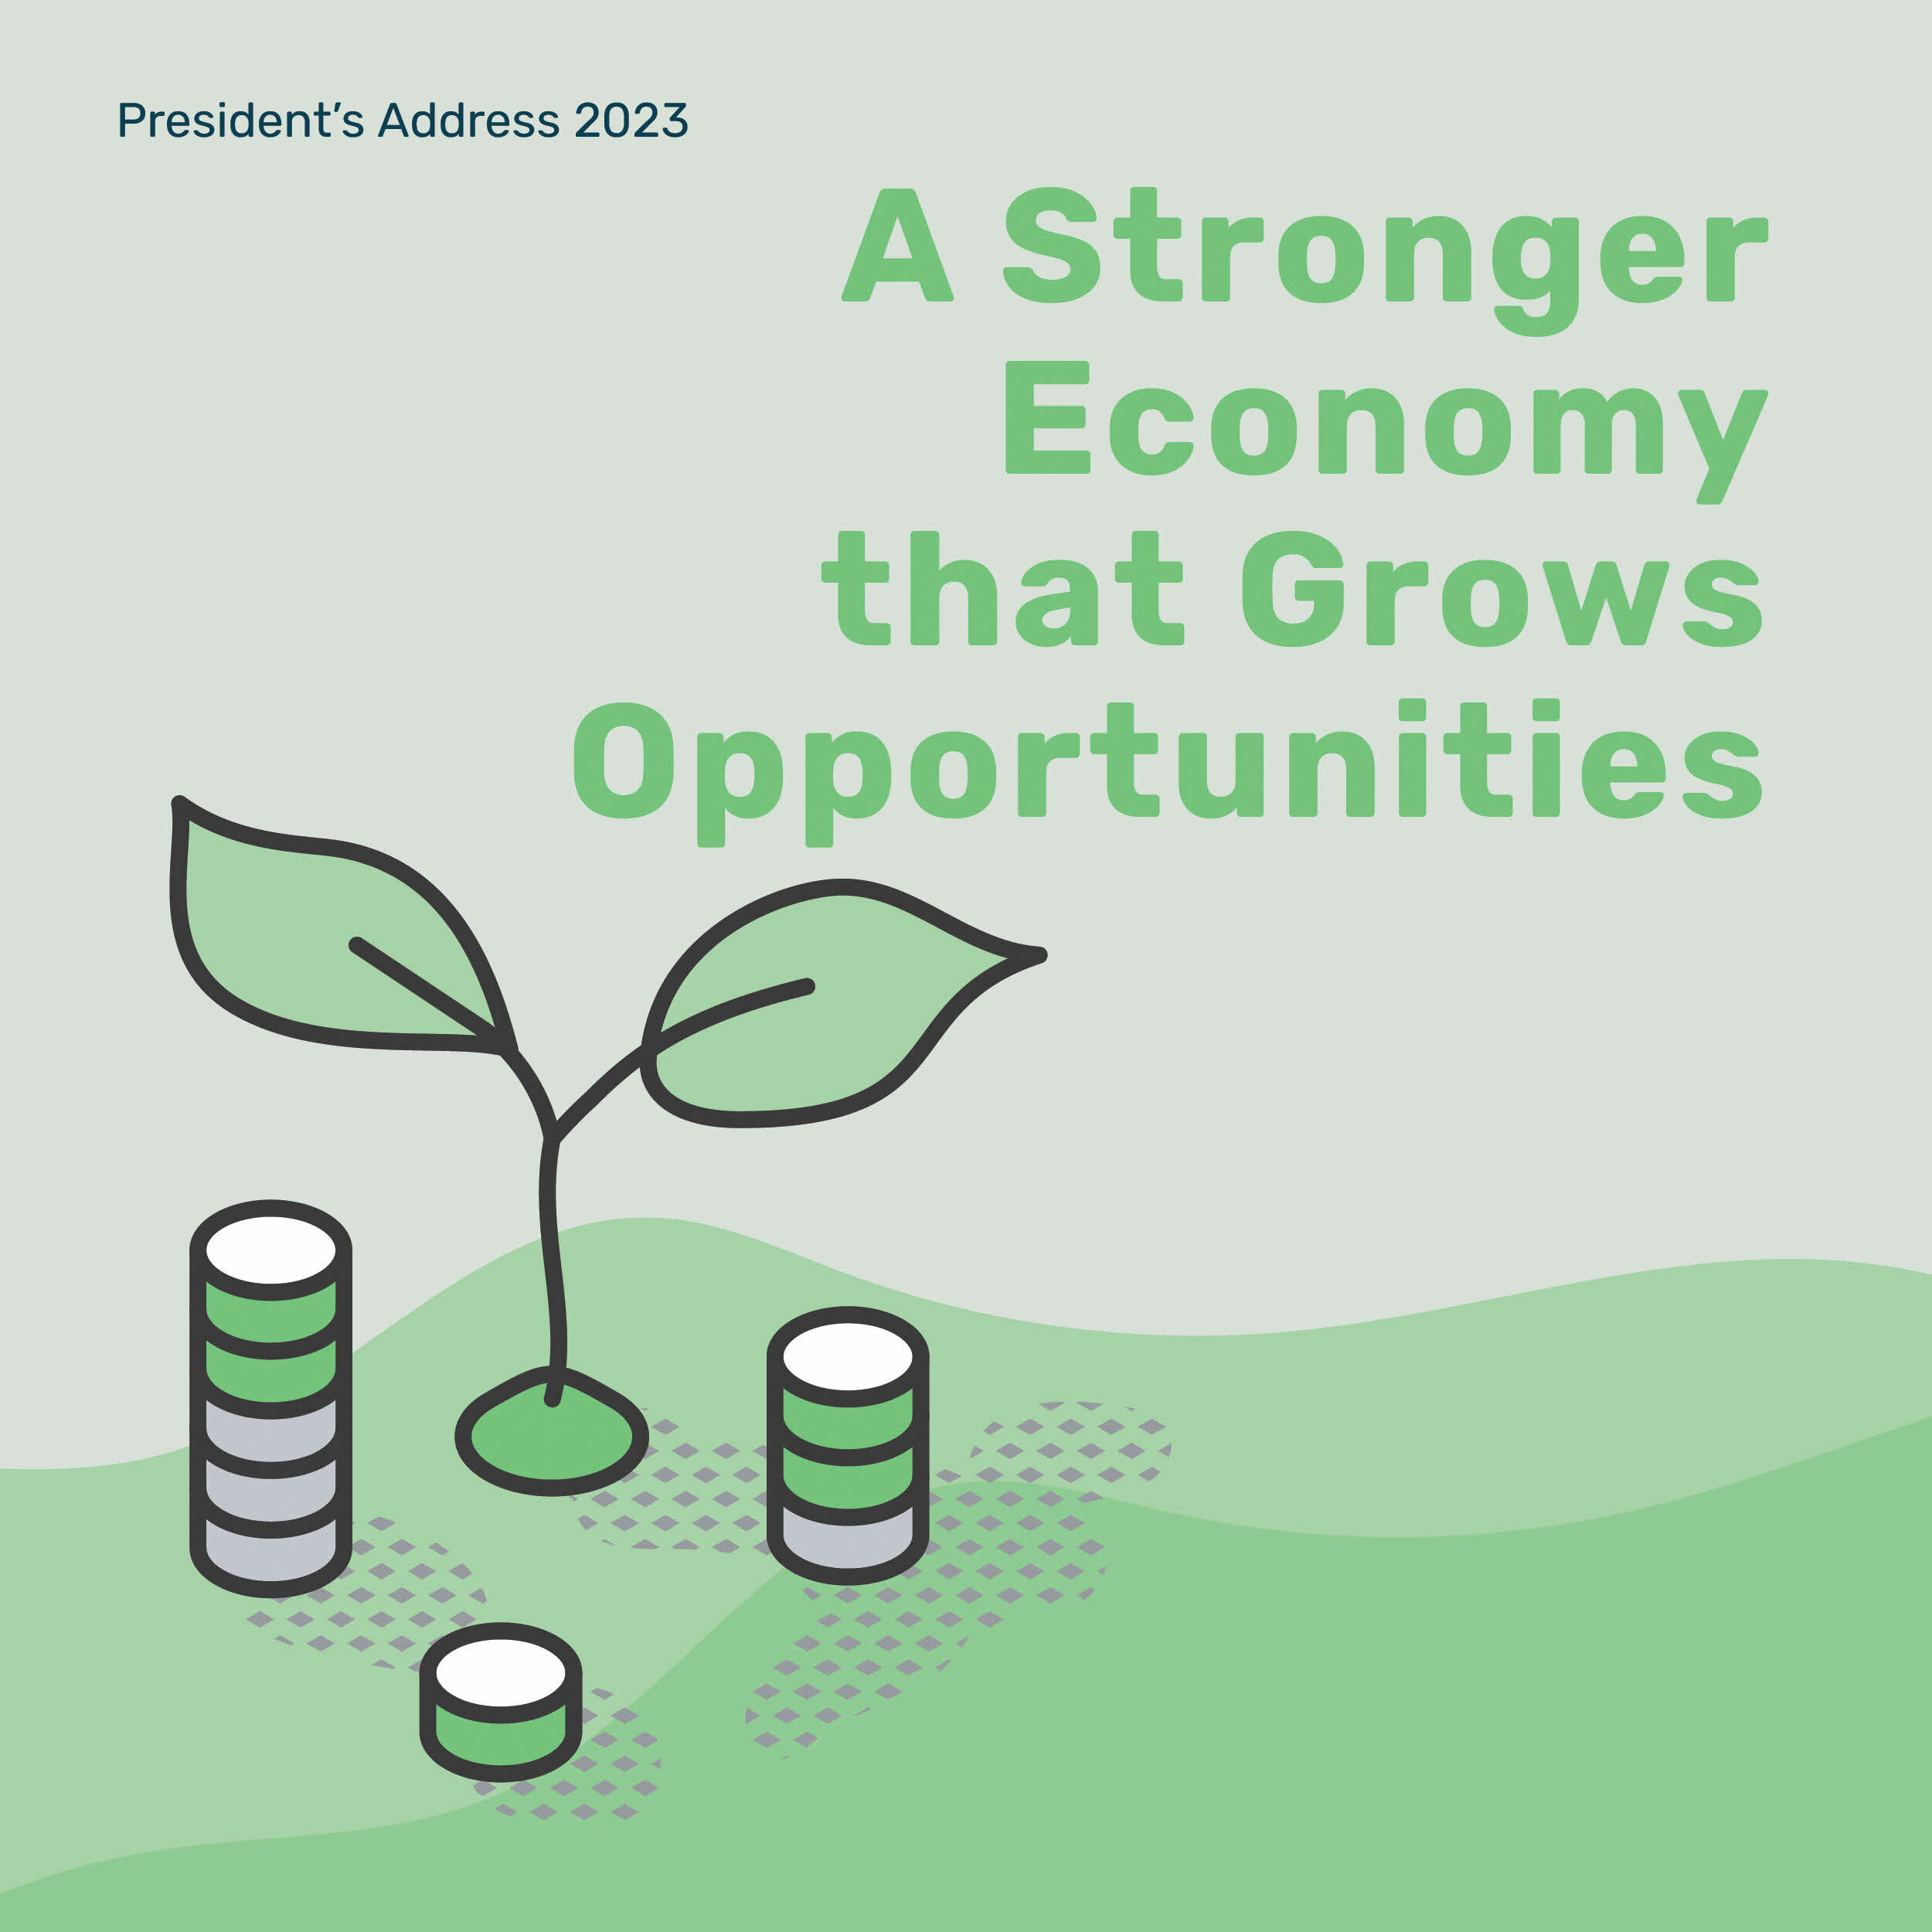 A Stronger Economy that Grows Opportunities